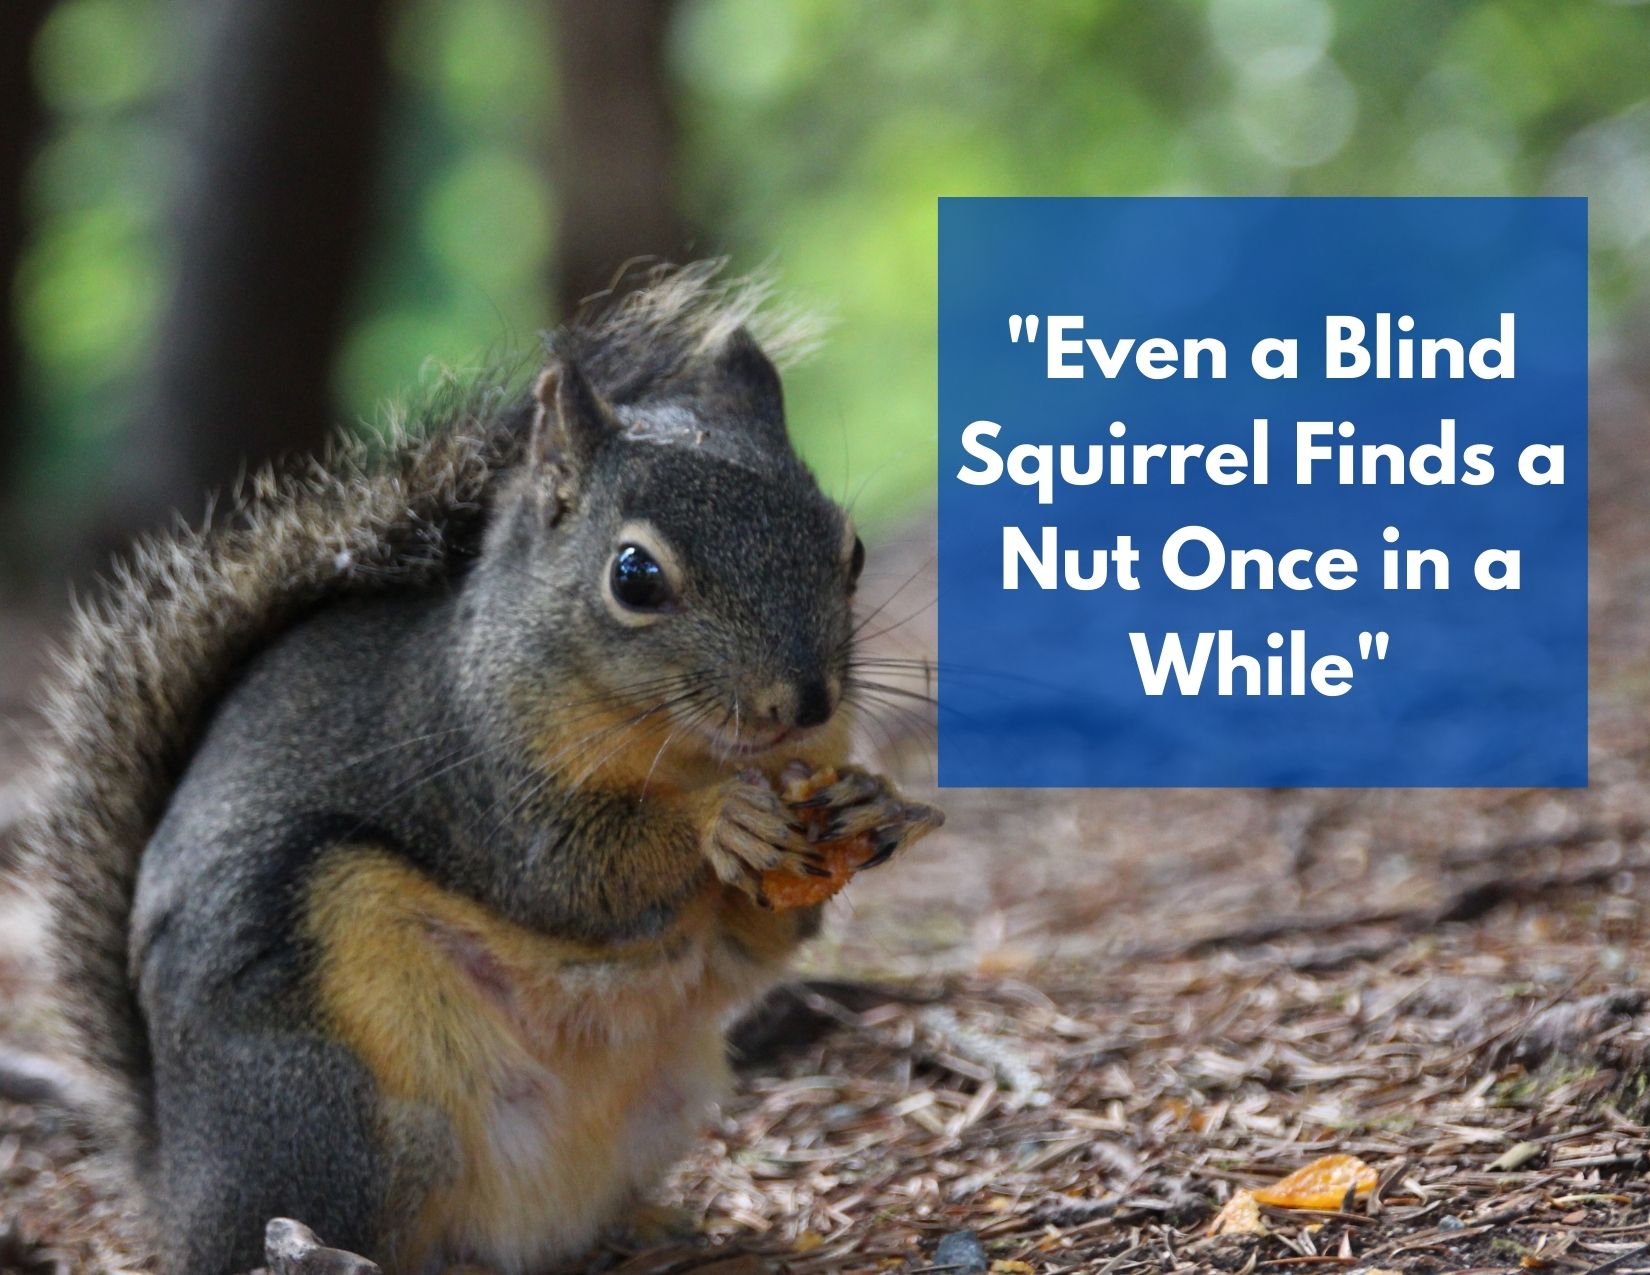 A picture of a squirrel with a nut and the expression "even a blind squirrel finds a nut once in a while"